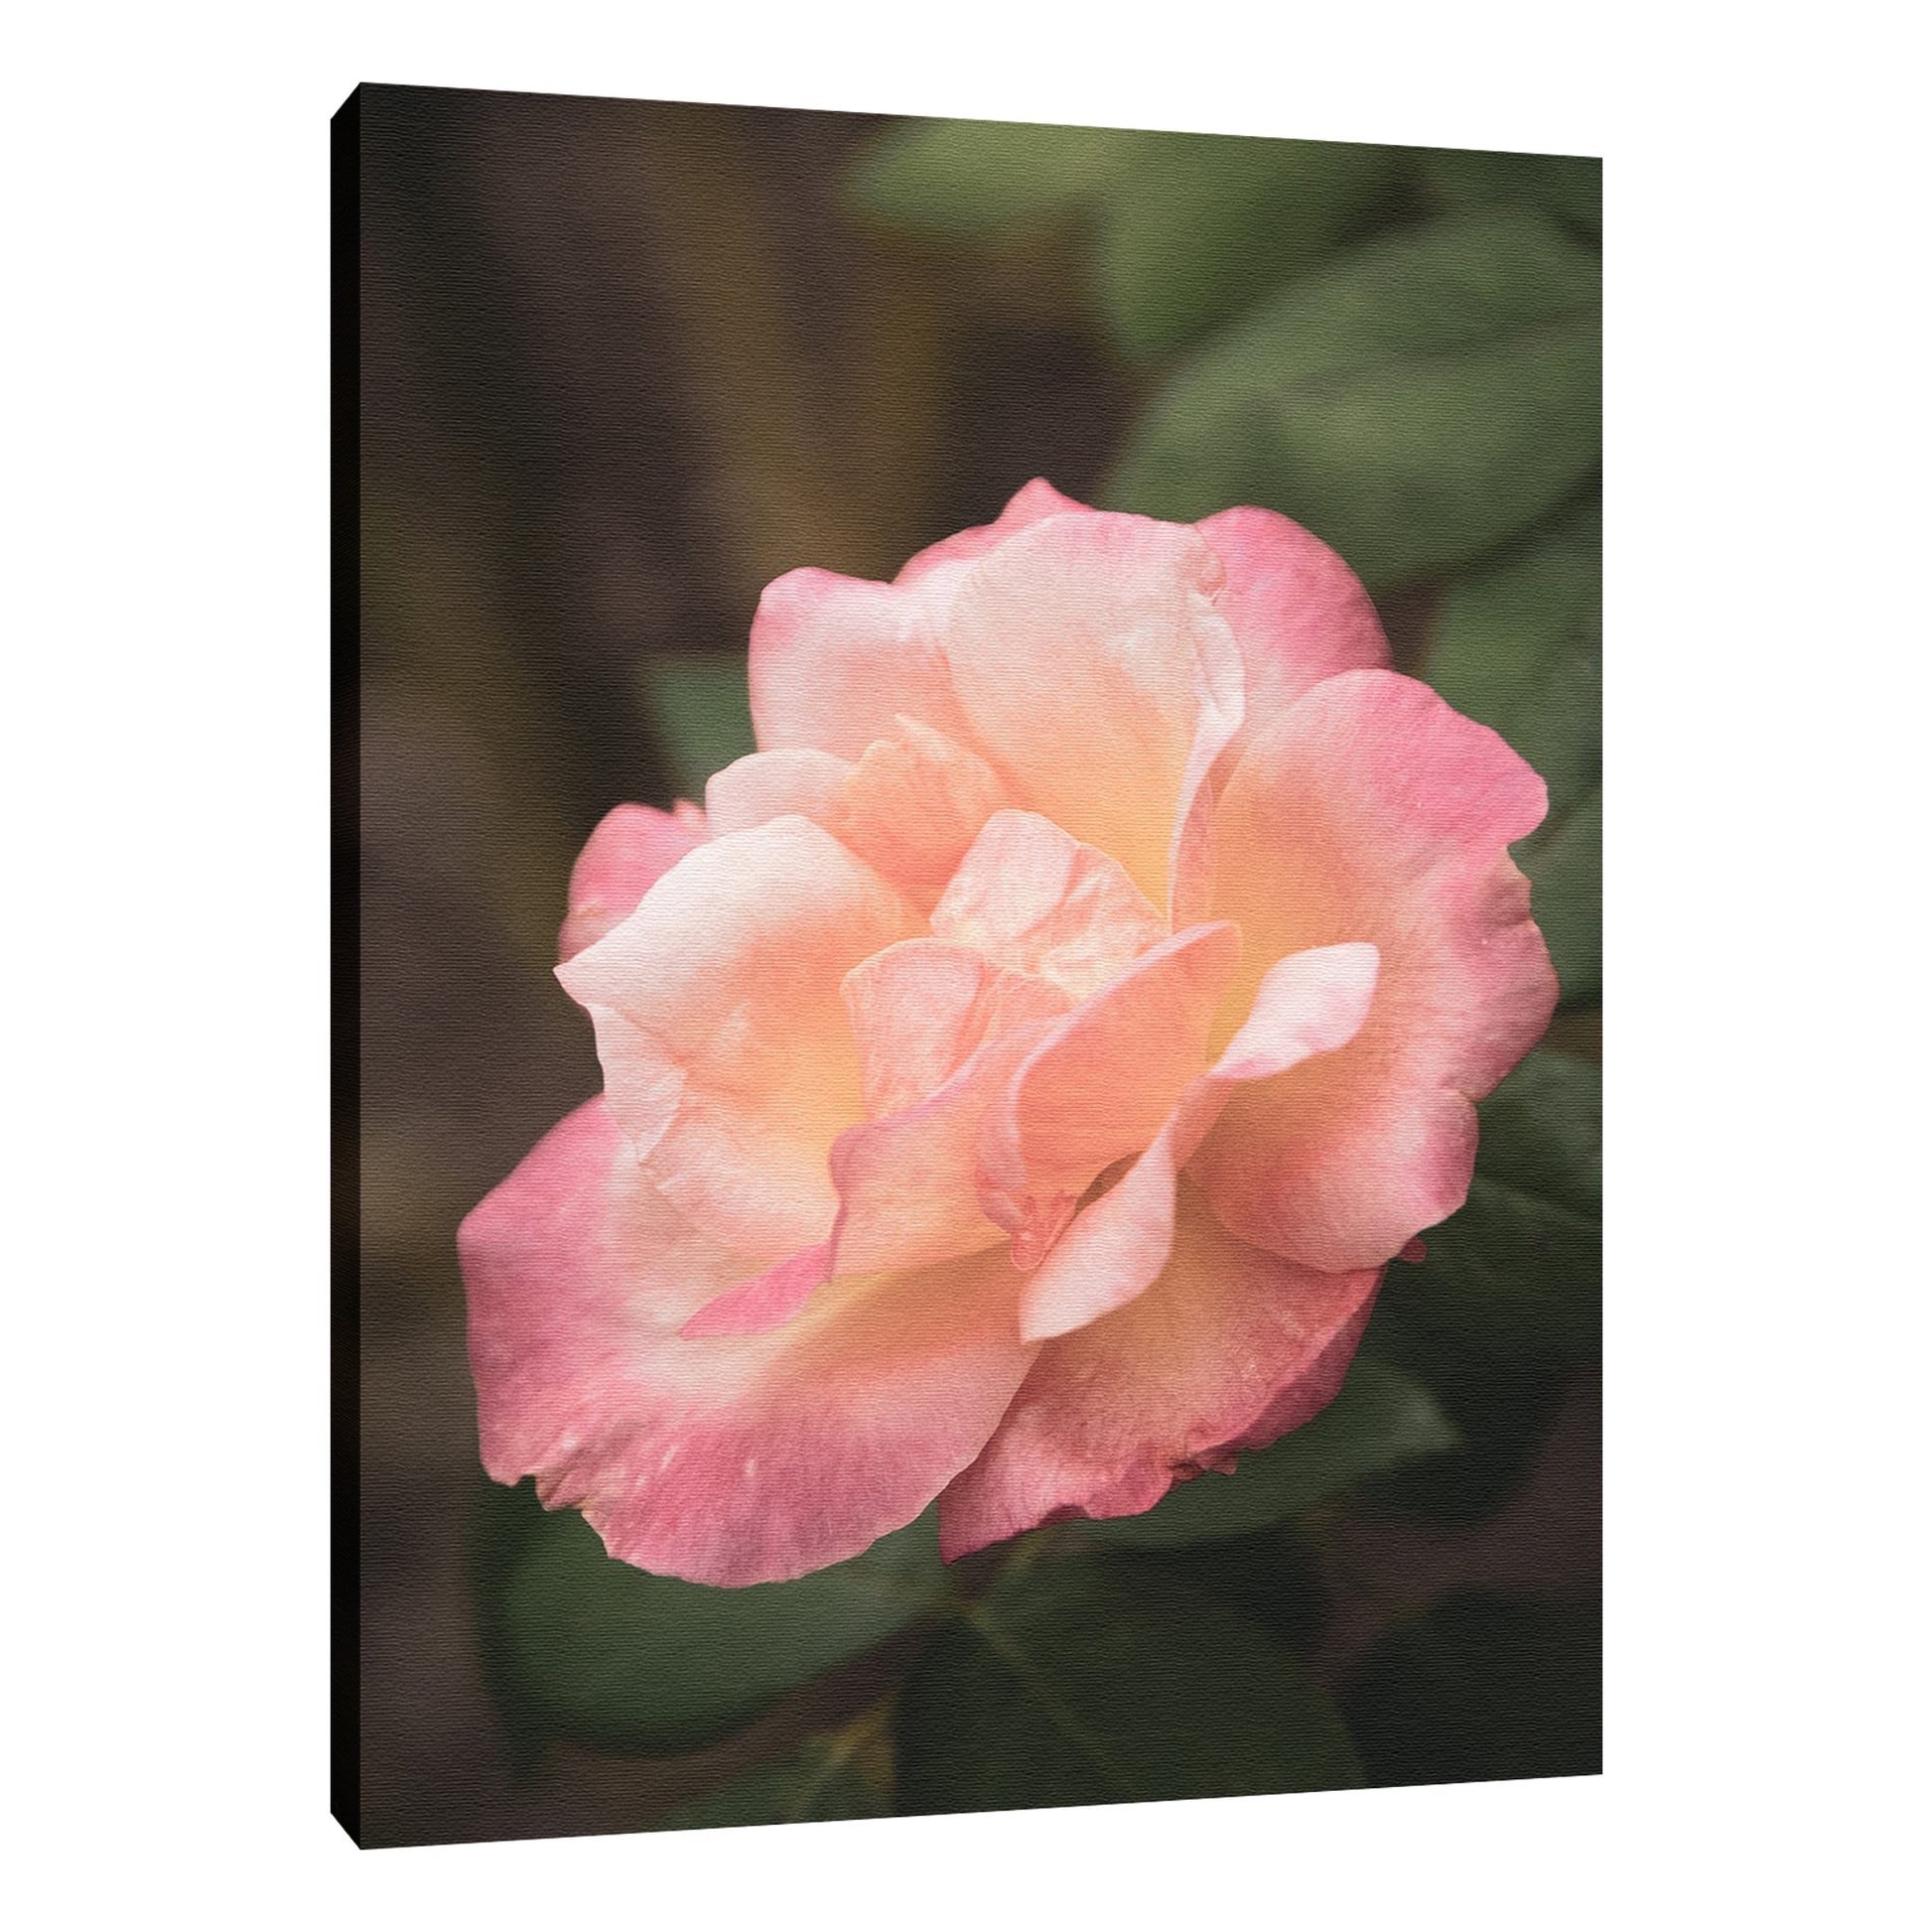 Pink and White Softened Rose Floral Nature Photo Fine Art Canvas Wall Art Prints  - PIPAFINEART